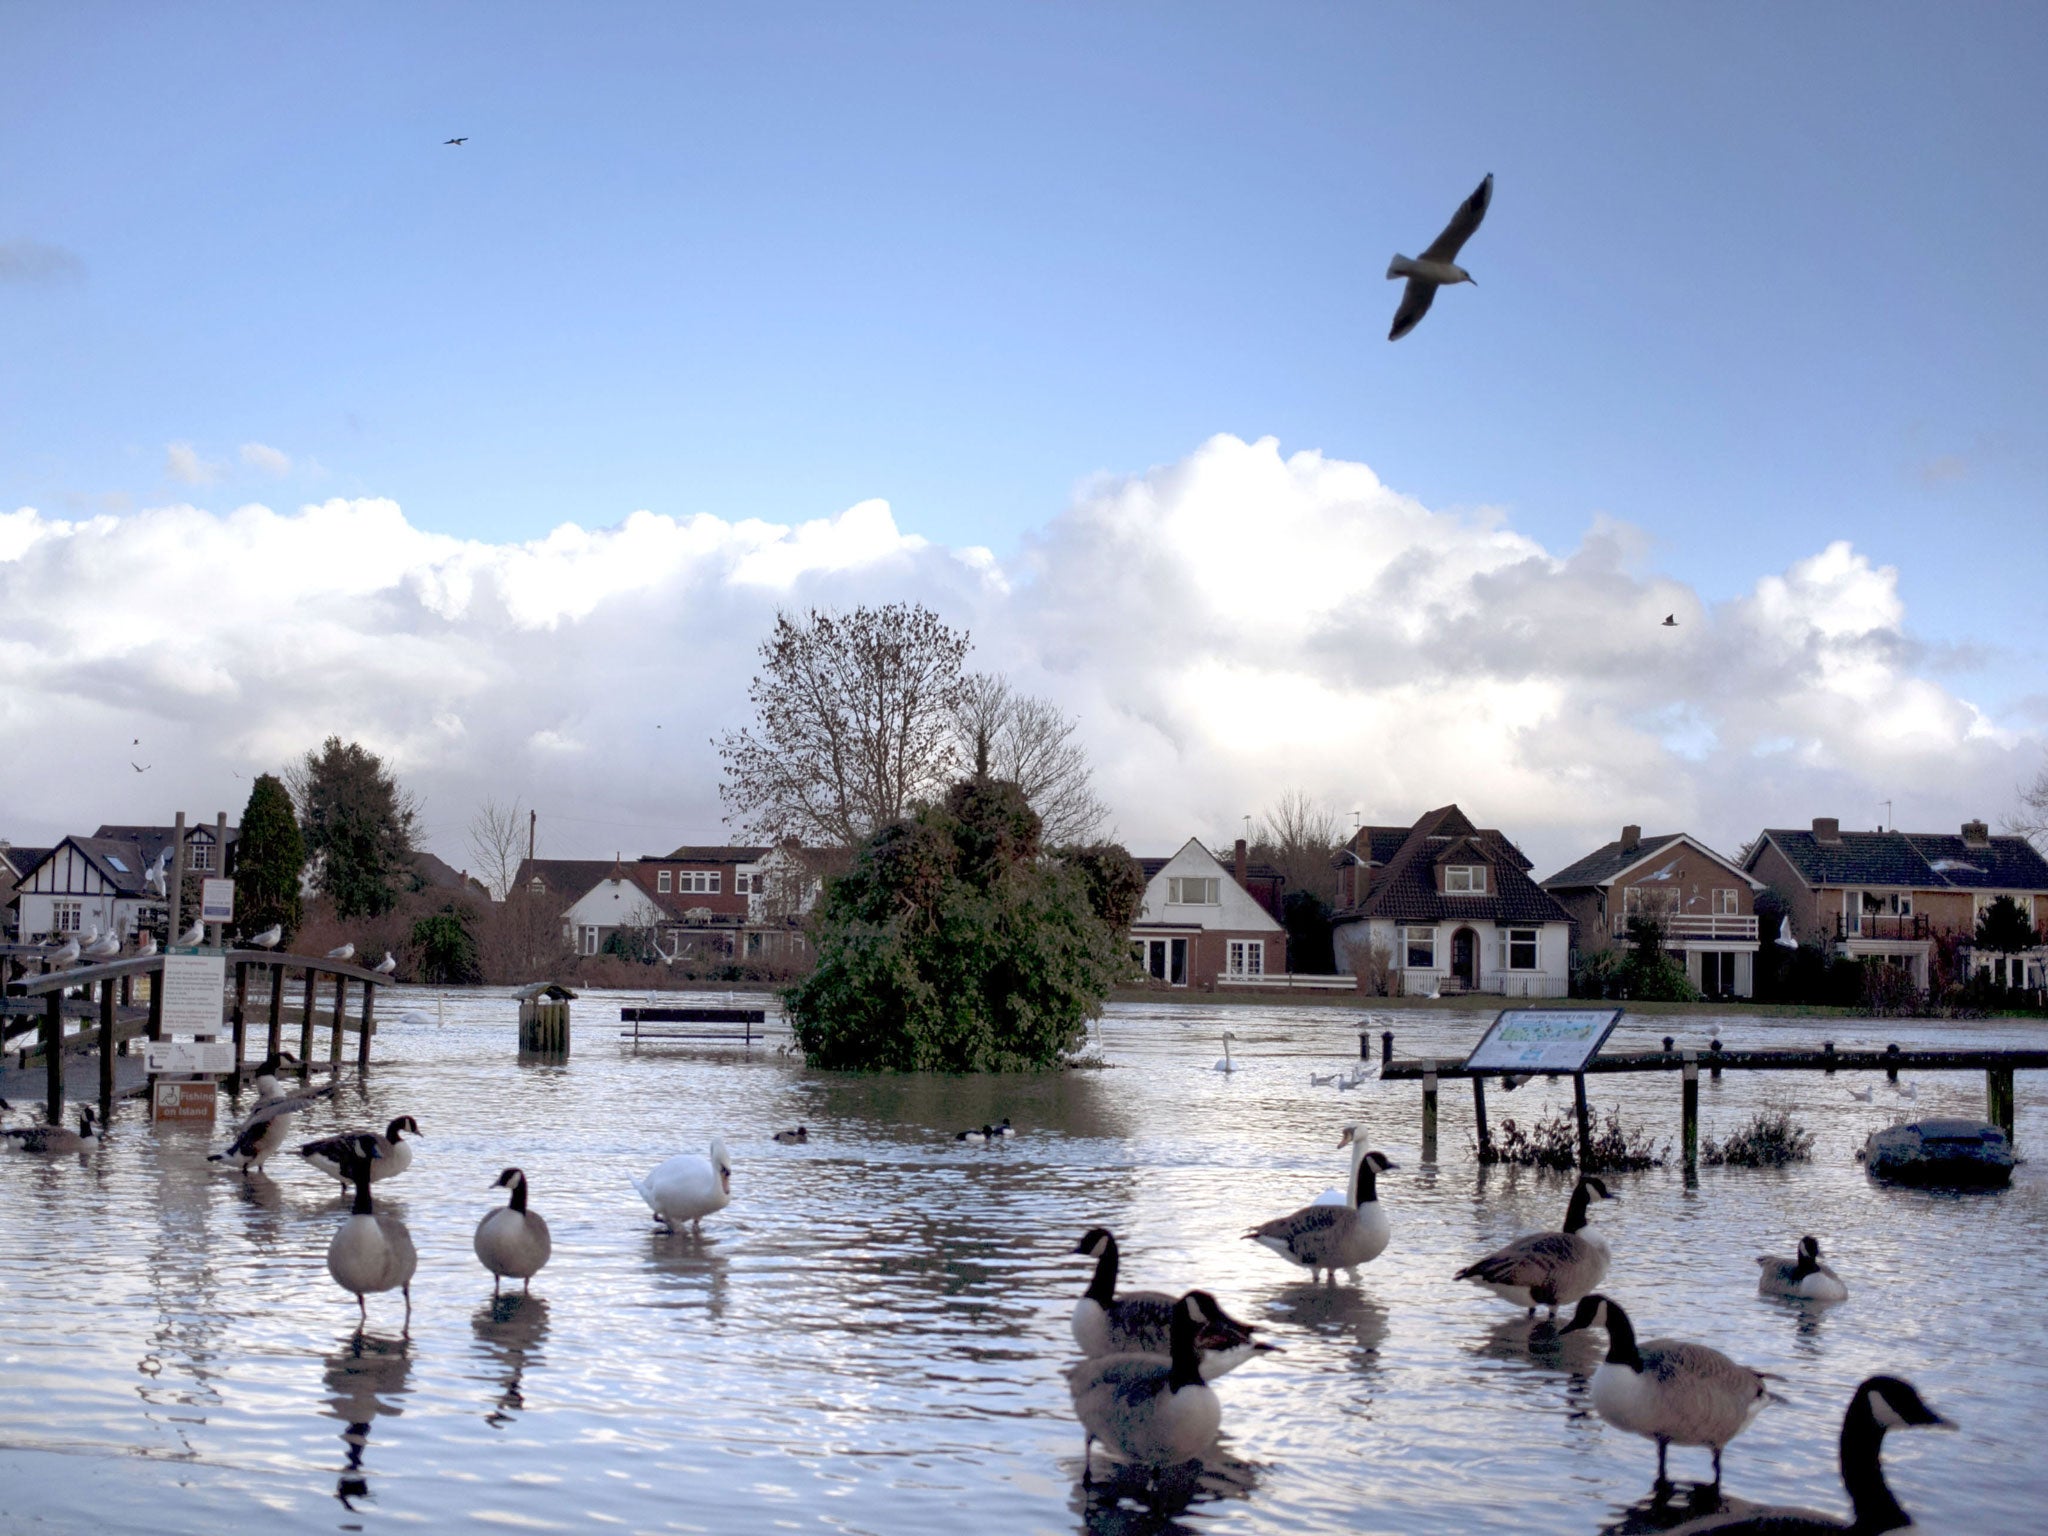 Flood Re proposals are expected to become part of the Water Bill in mid-2015